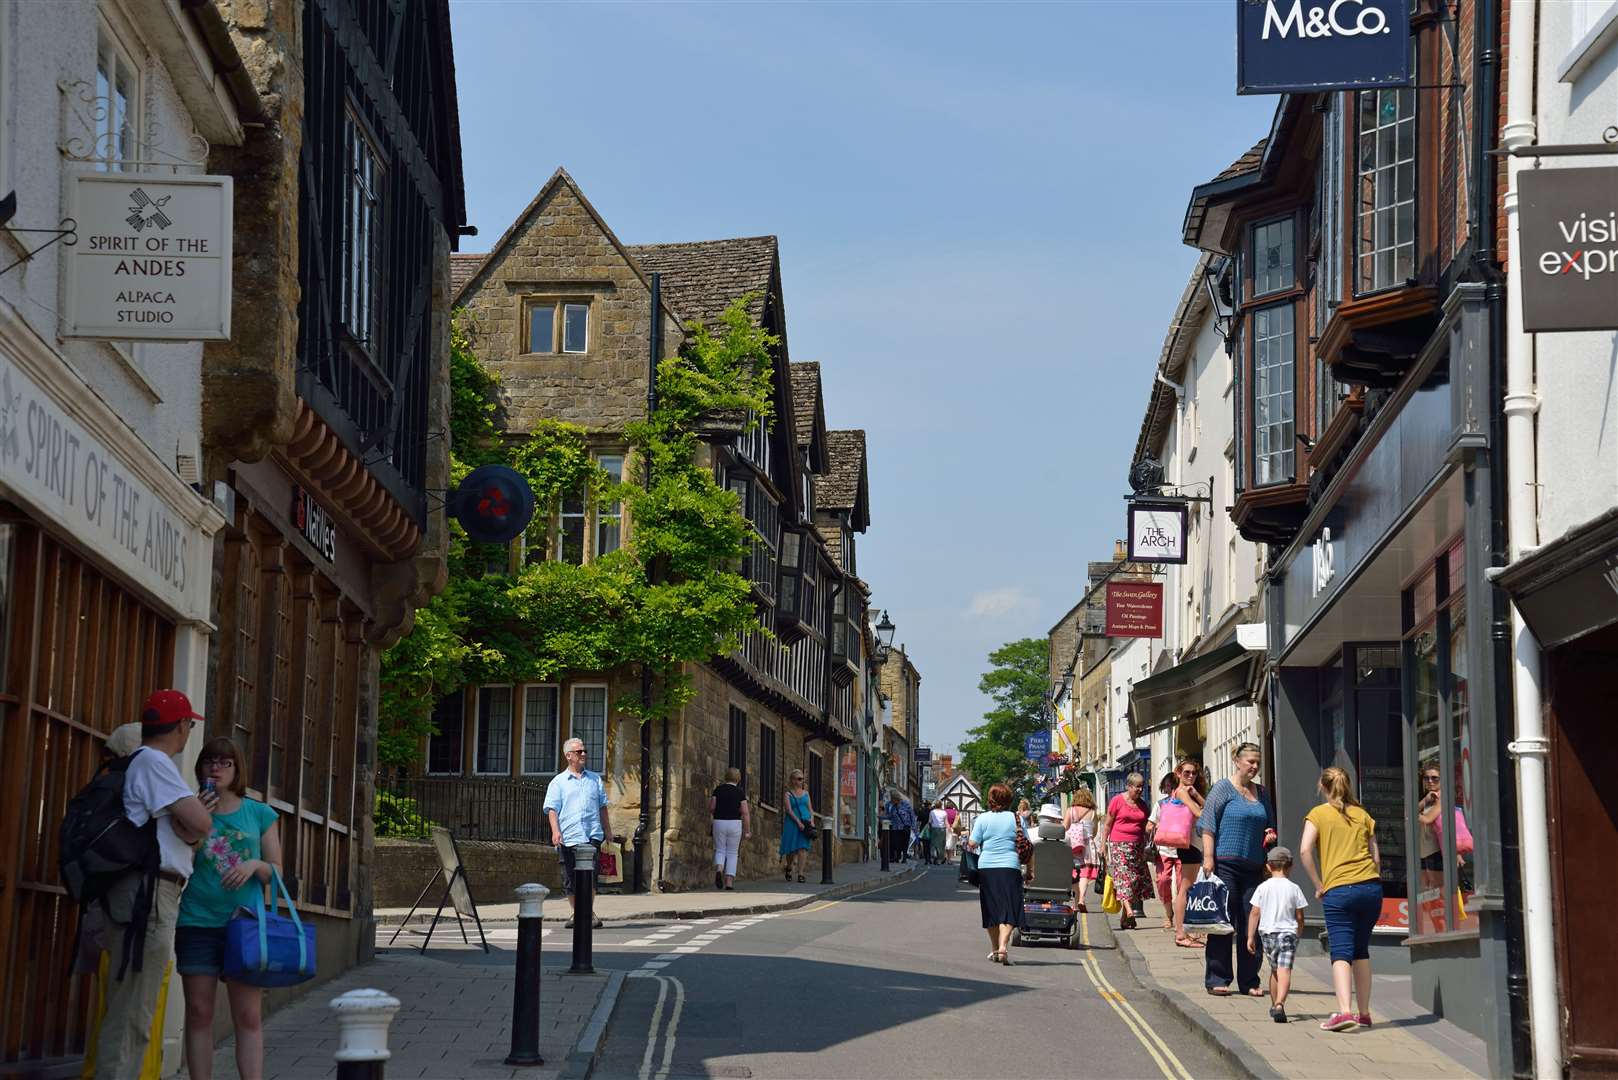 Sherborne was described as handsome and historic (Alamy/PA)